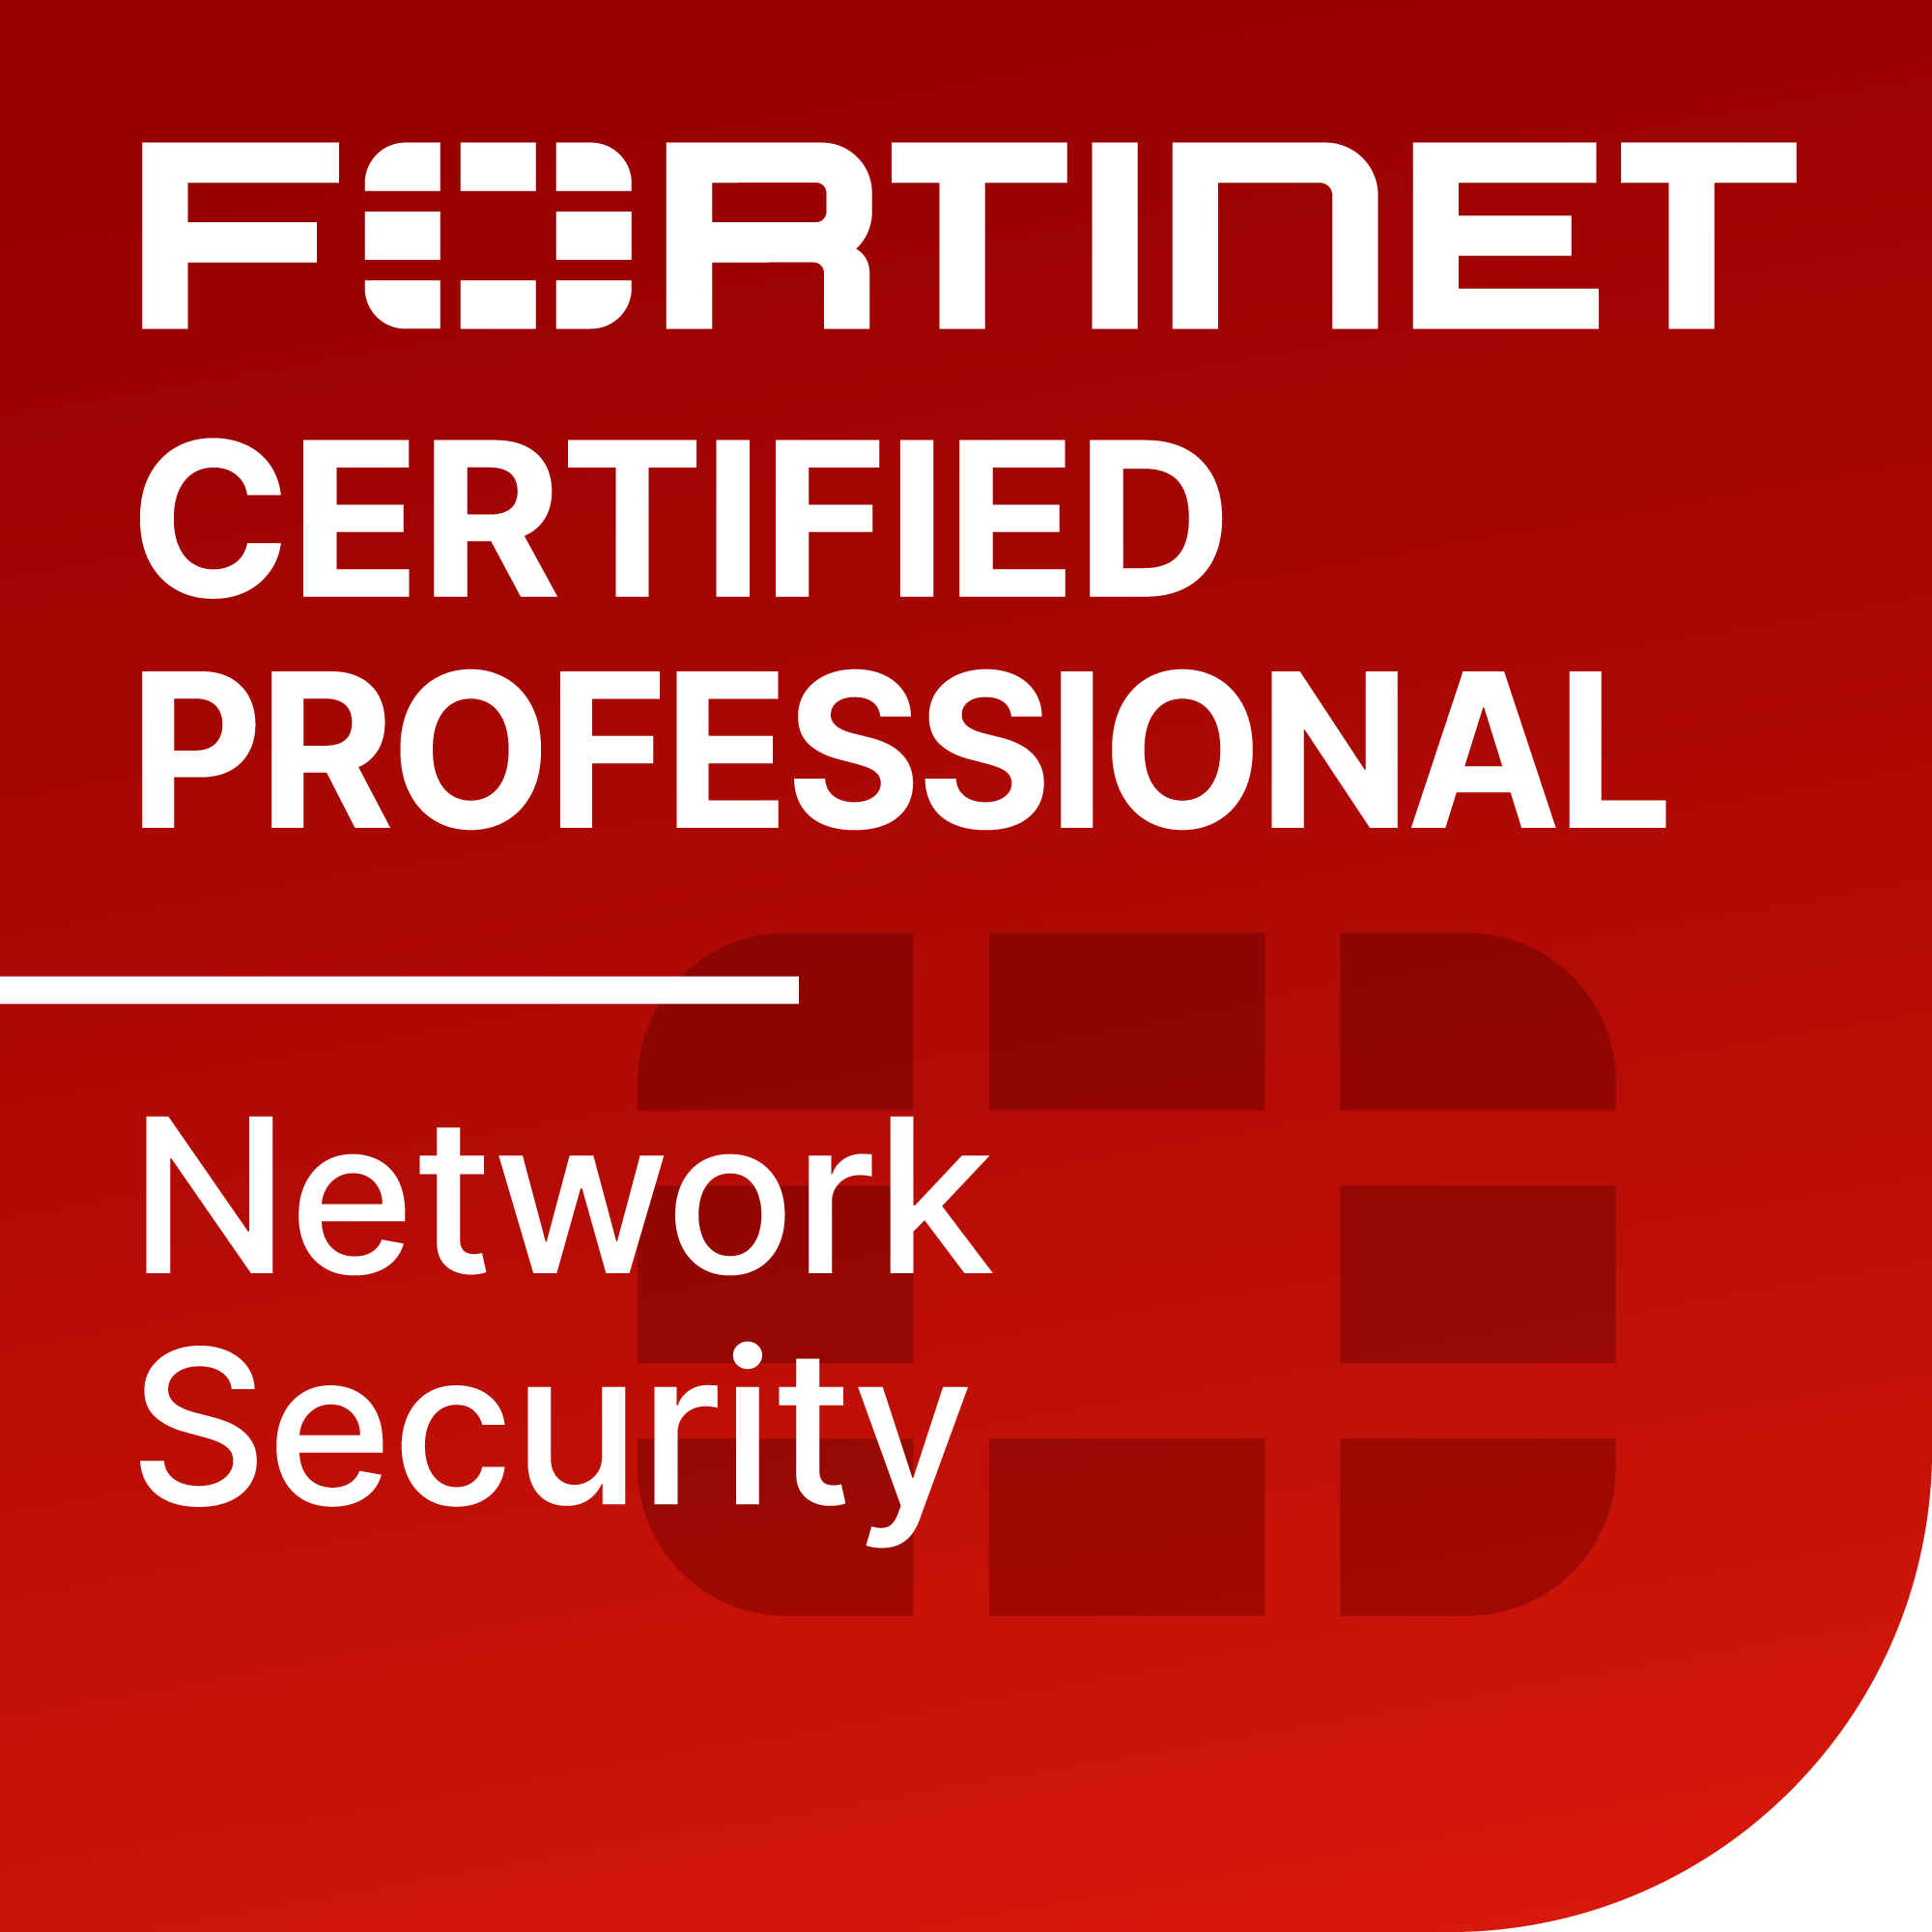 Fortinet certification Network security